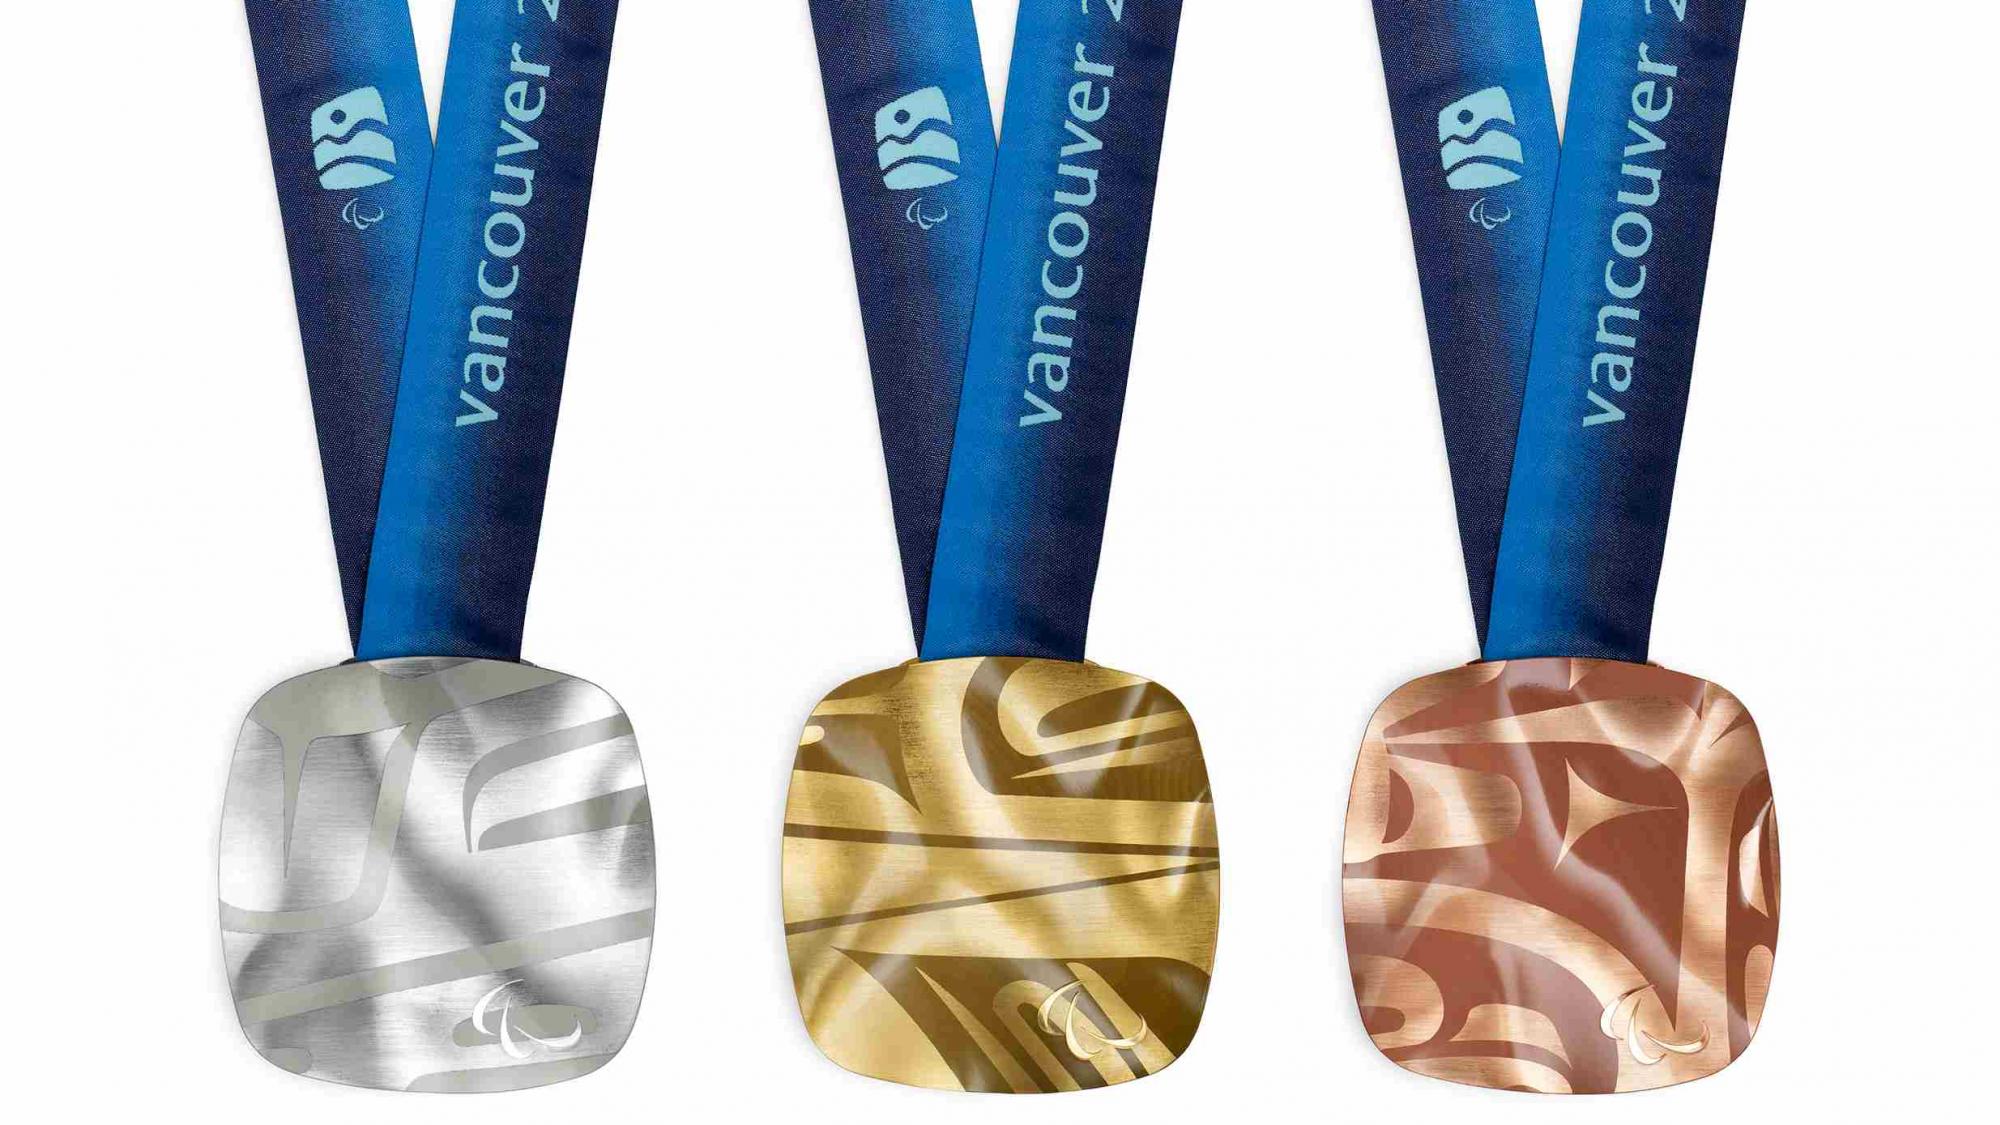 The medals of the Vancouver 2010 Paralympic Winter Games